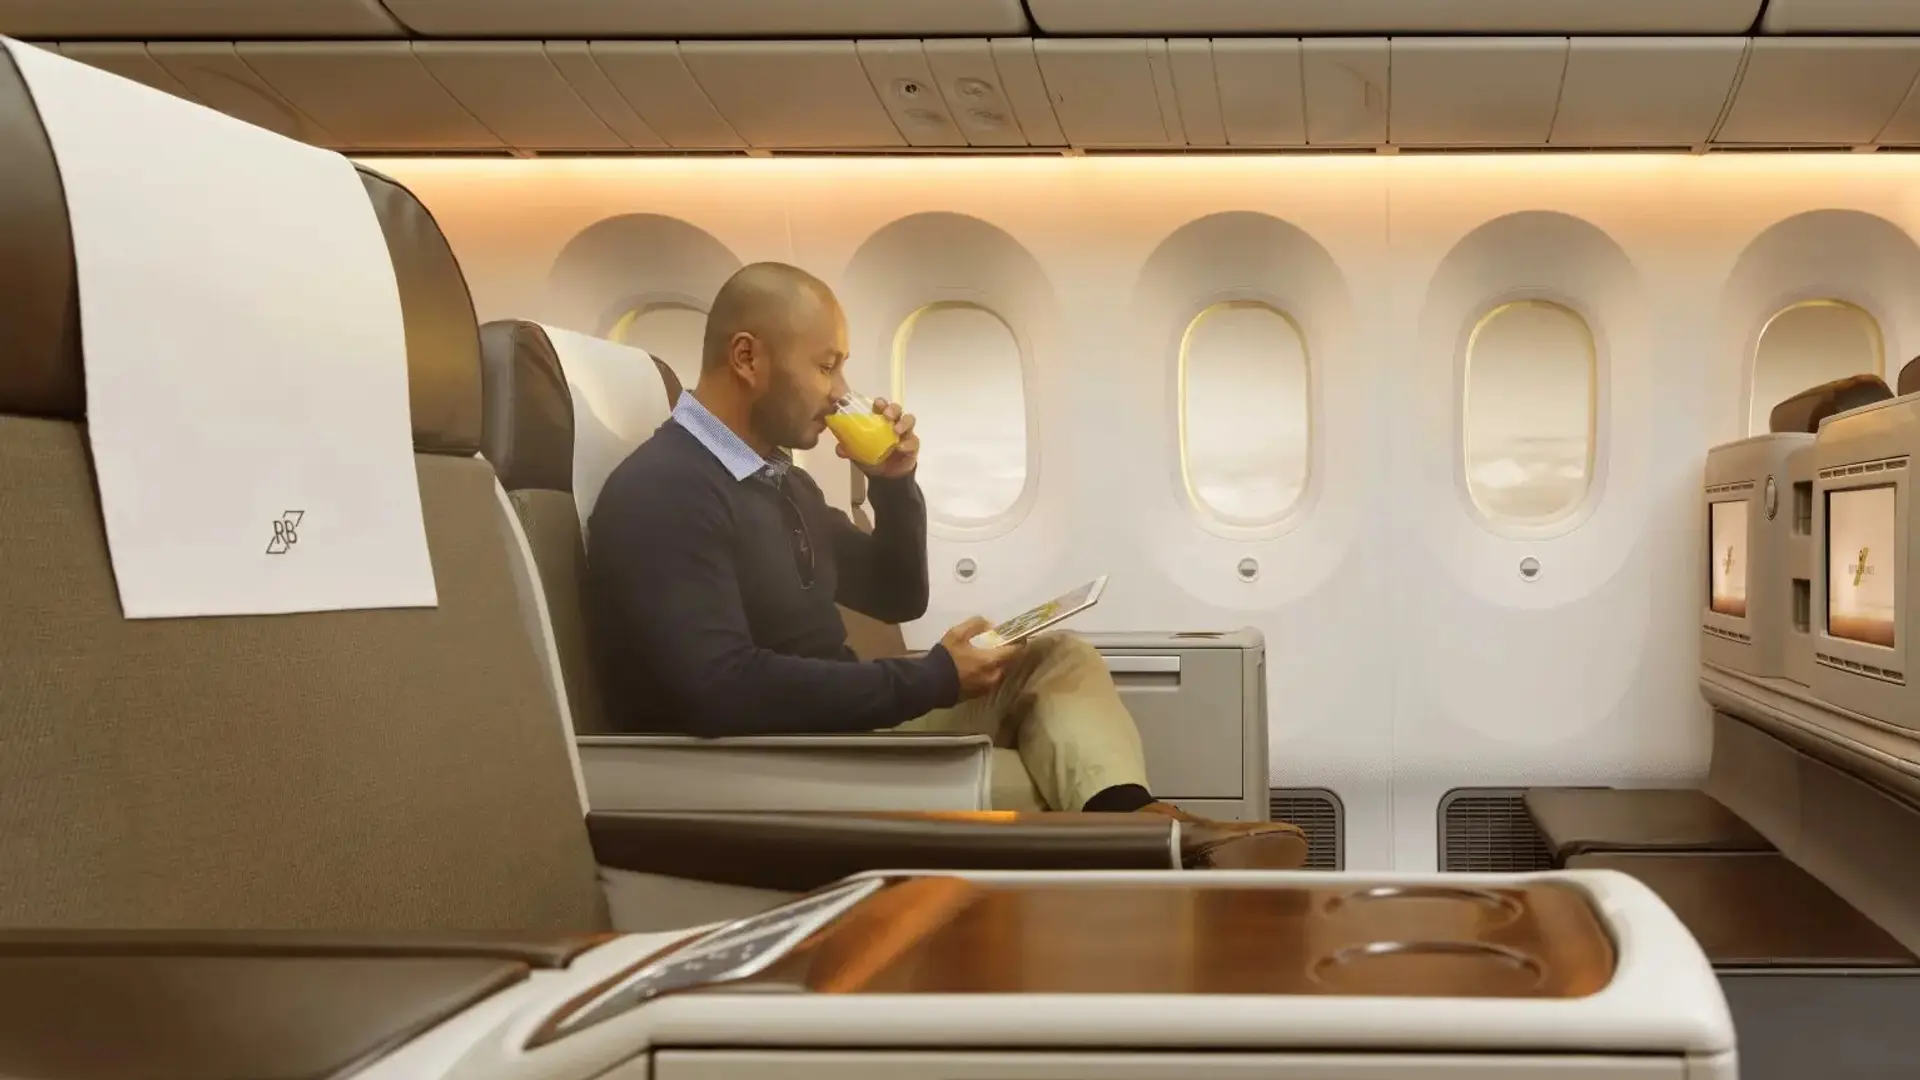 a man drinking a beverage while sitting on an airplane